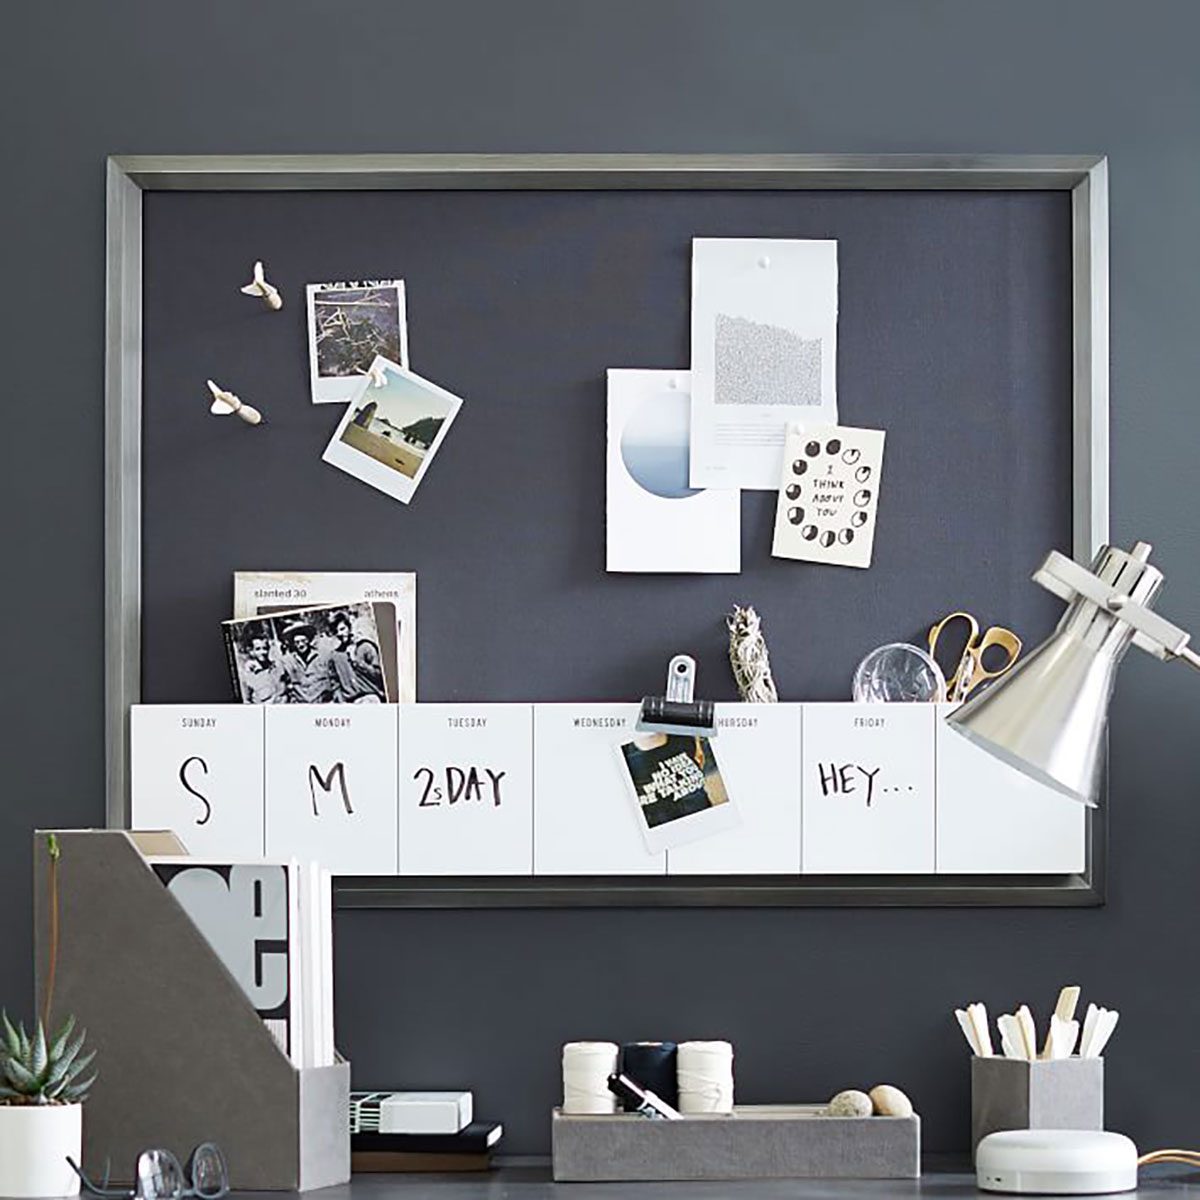 10 Best Home Office Wall Organizers The Family Handyman